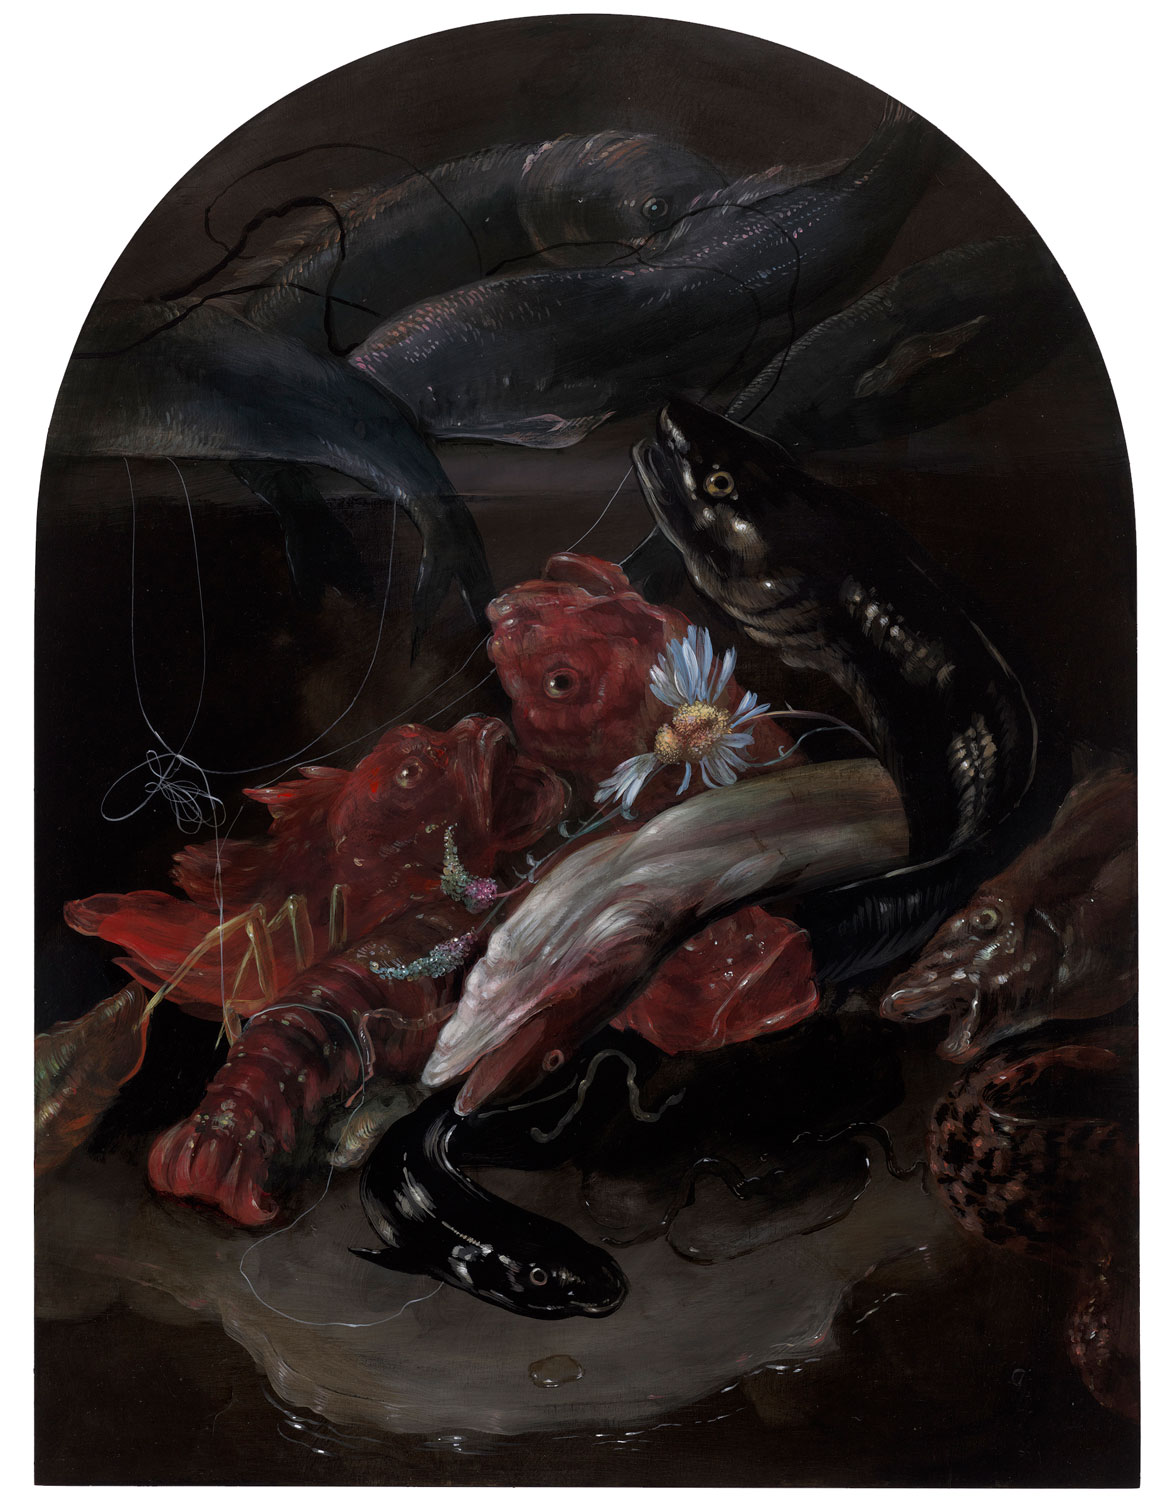 Nicole Duennebier, "Alcove Diptych with Scintillating Fish (2)," acrylic on panel.